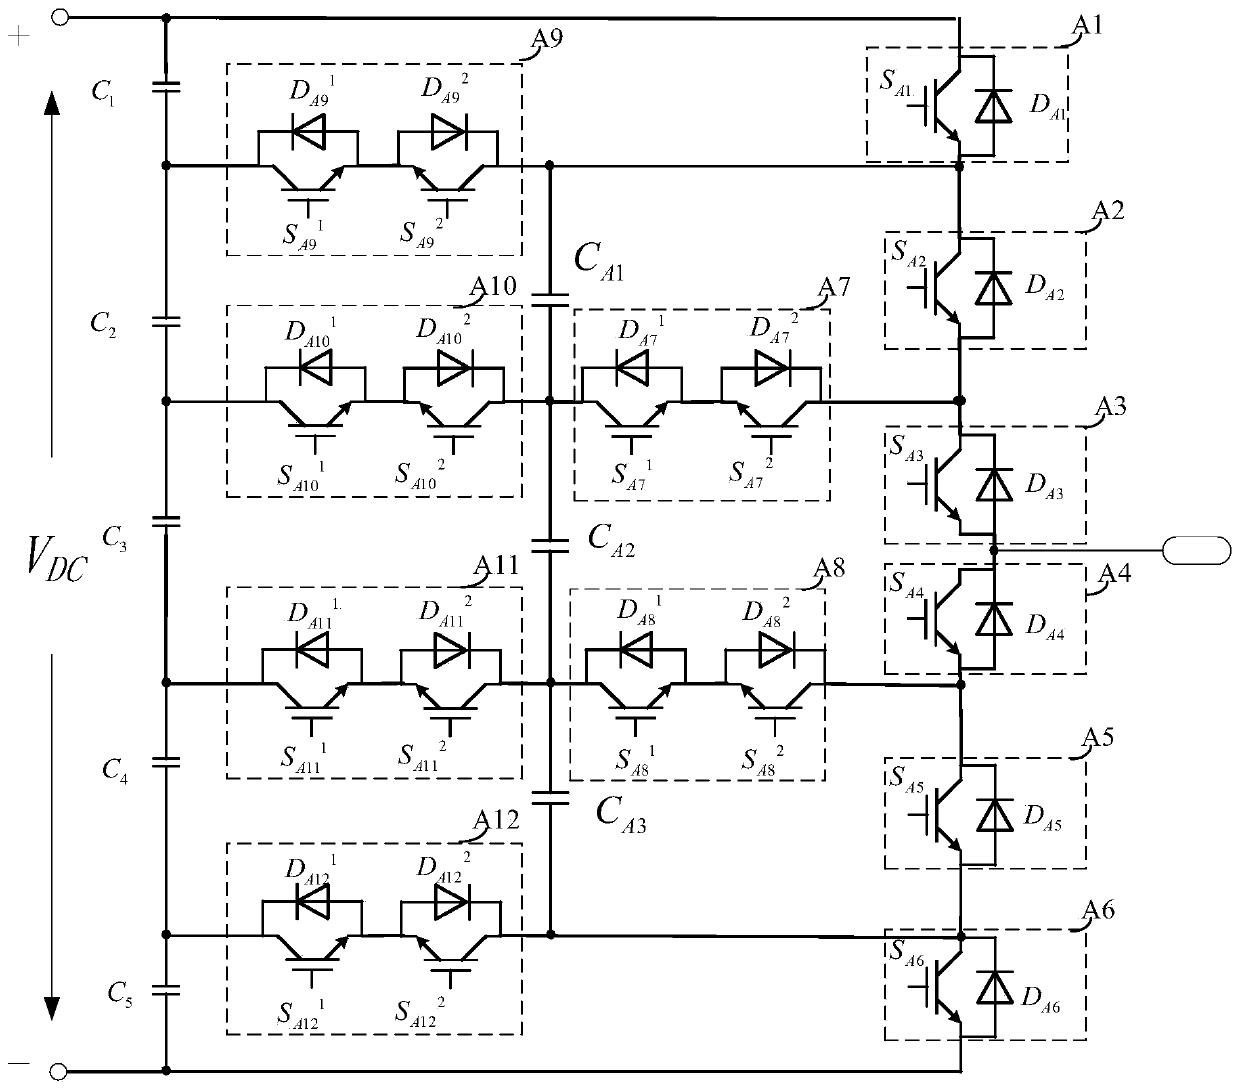 A six-level circuit topology for power conversion systems